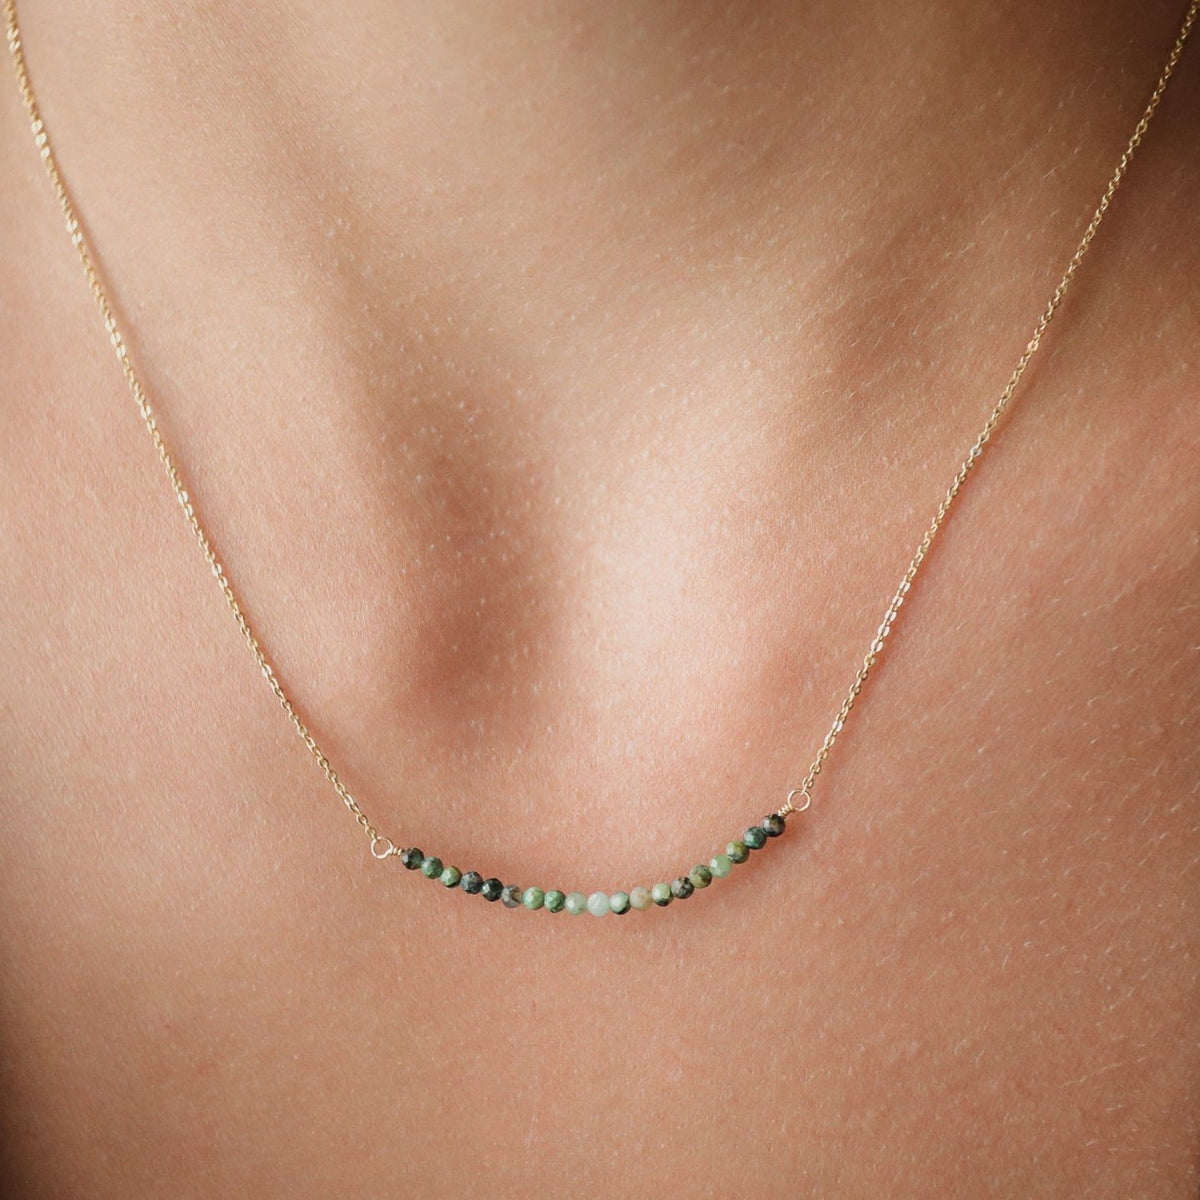 African turquoise bar necklace - 14K gold filled